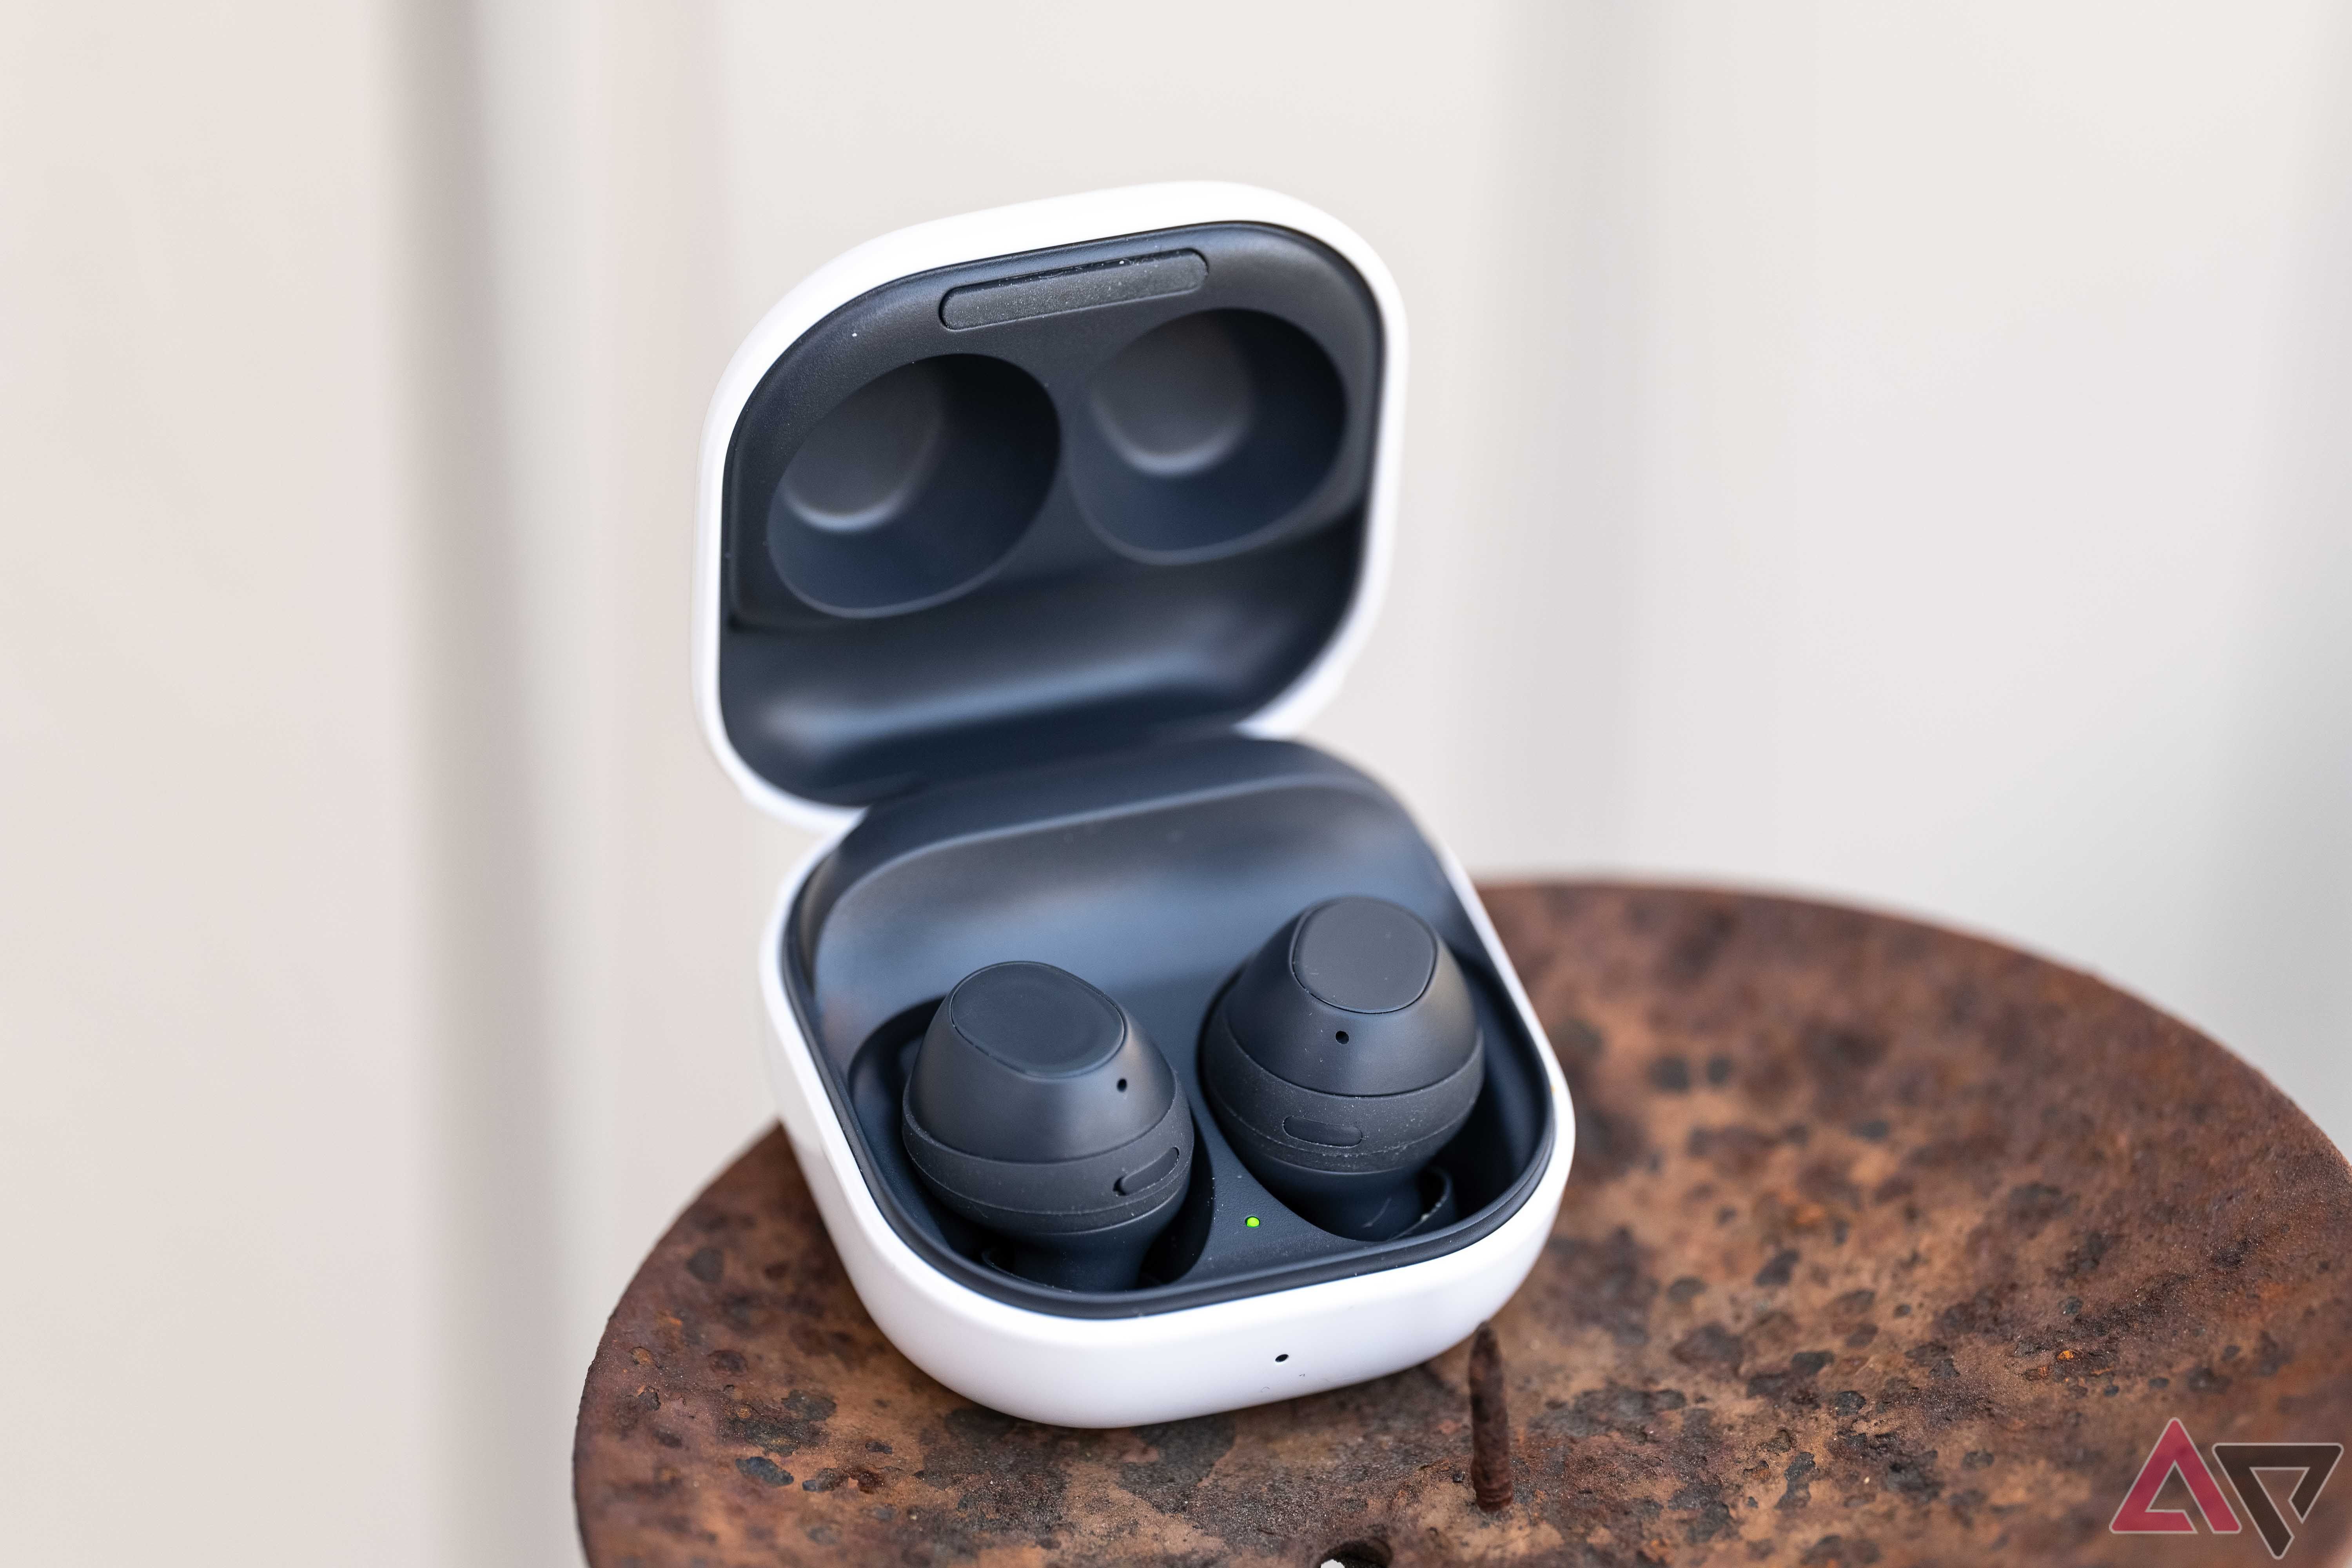 Samsung’s Galaxy Buds may get their first large design refresh